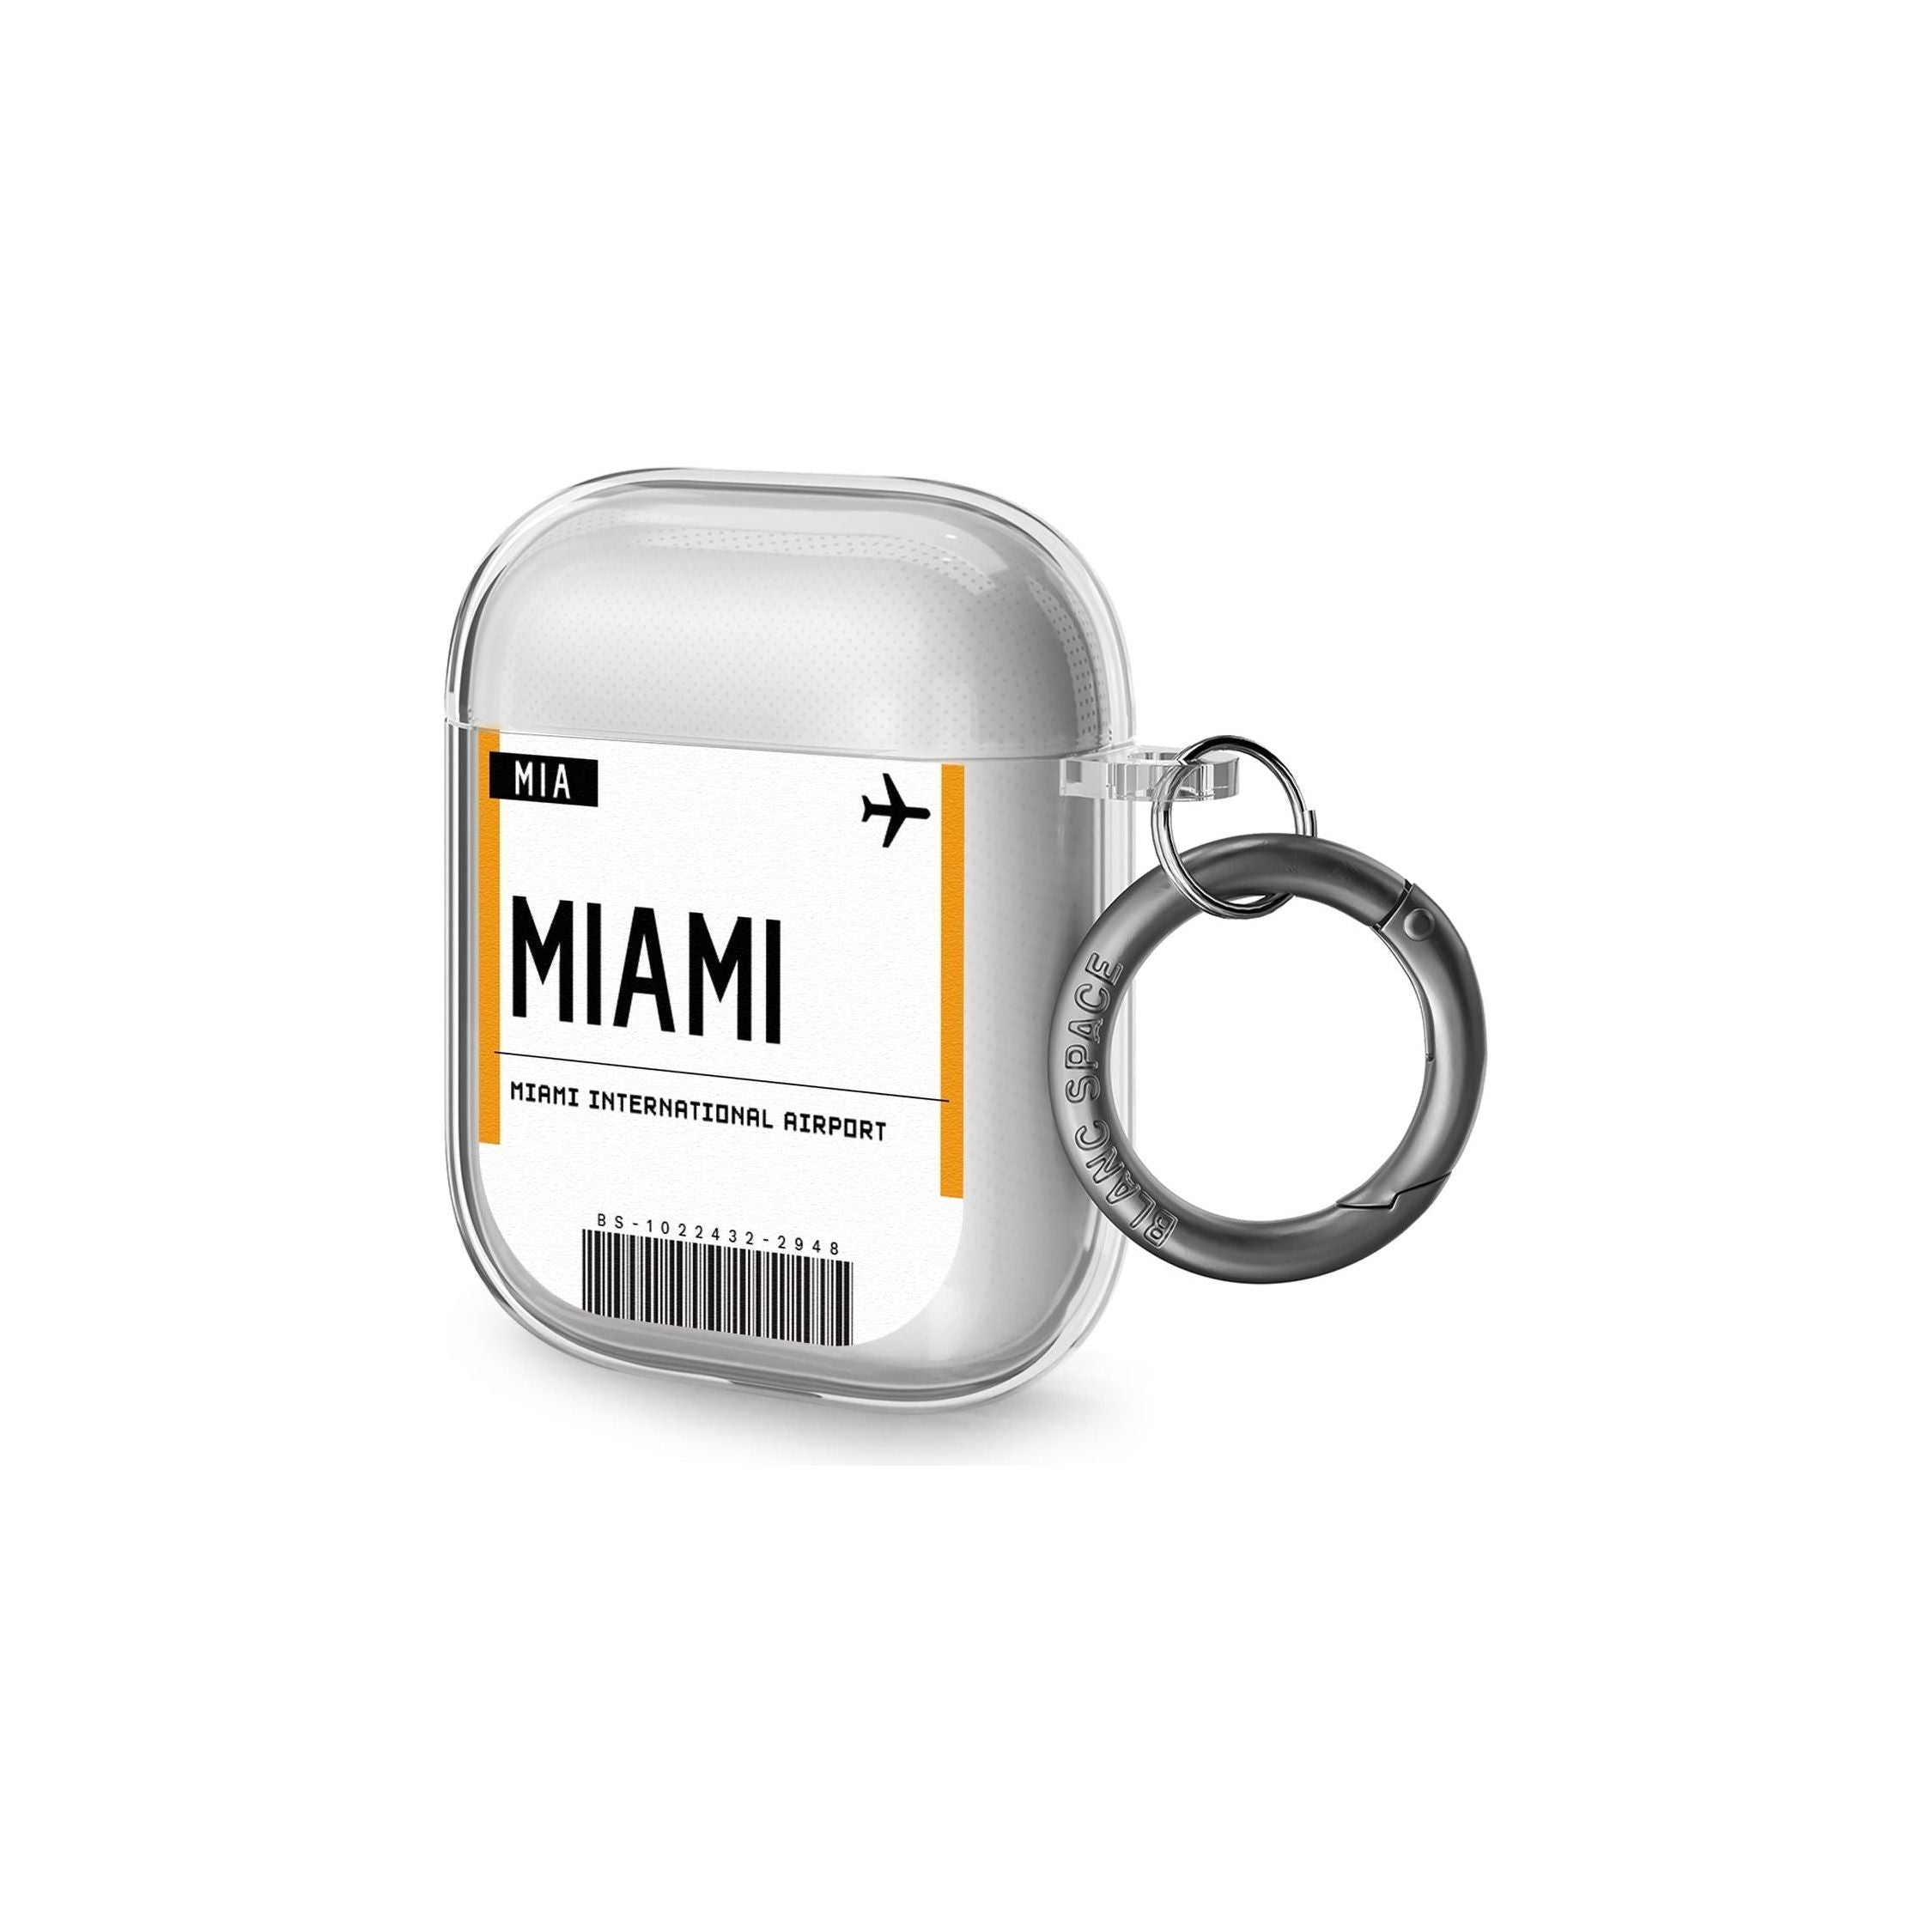 Miami Boarding Pass Airpods Case (2nd Generation)